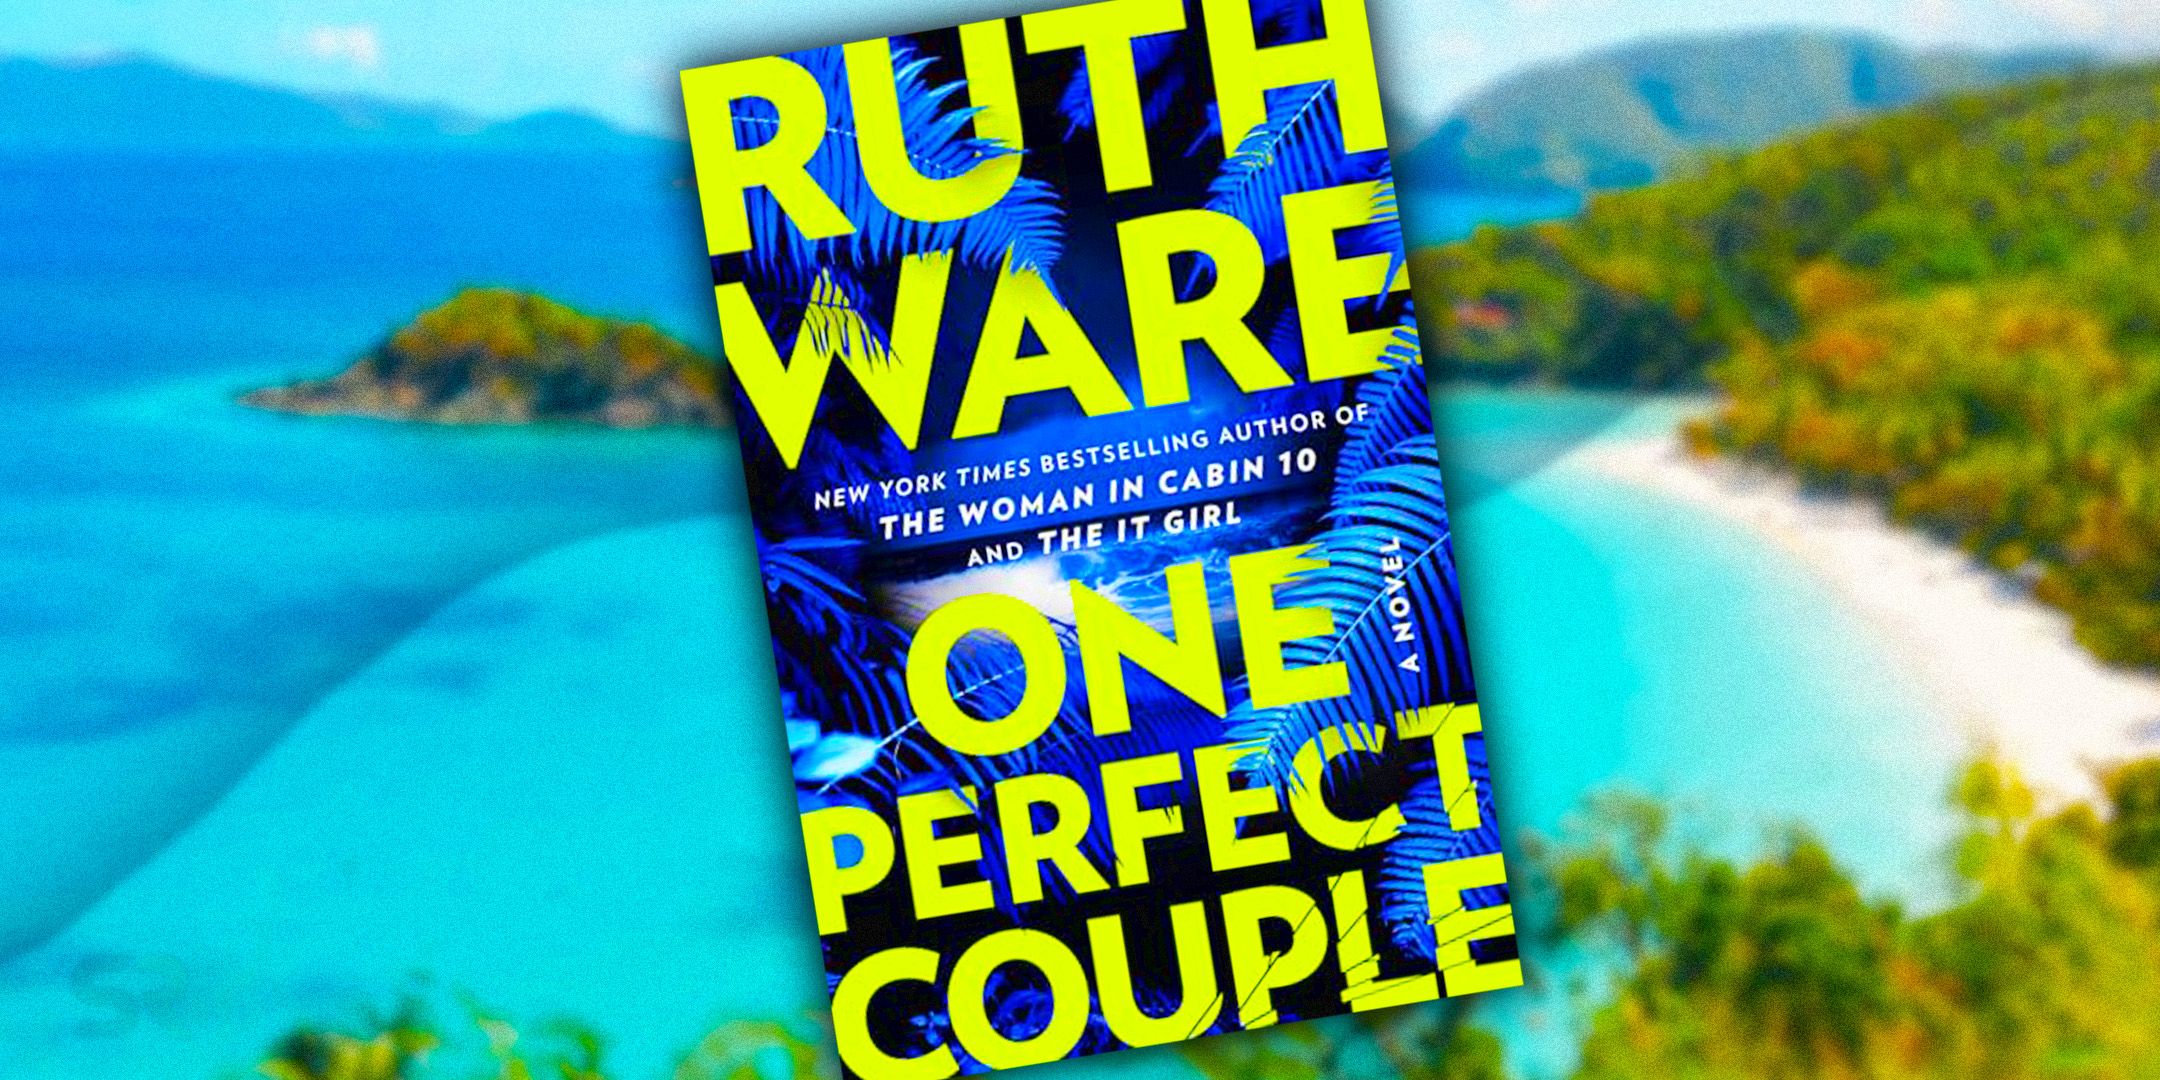 The cover of One Perfect Couple by Ruth Ware and an island as the background